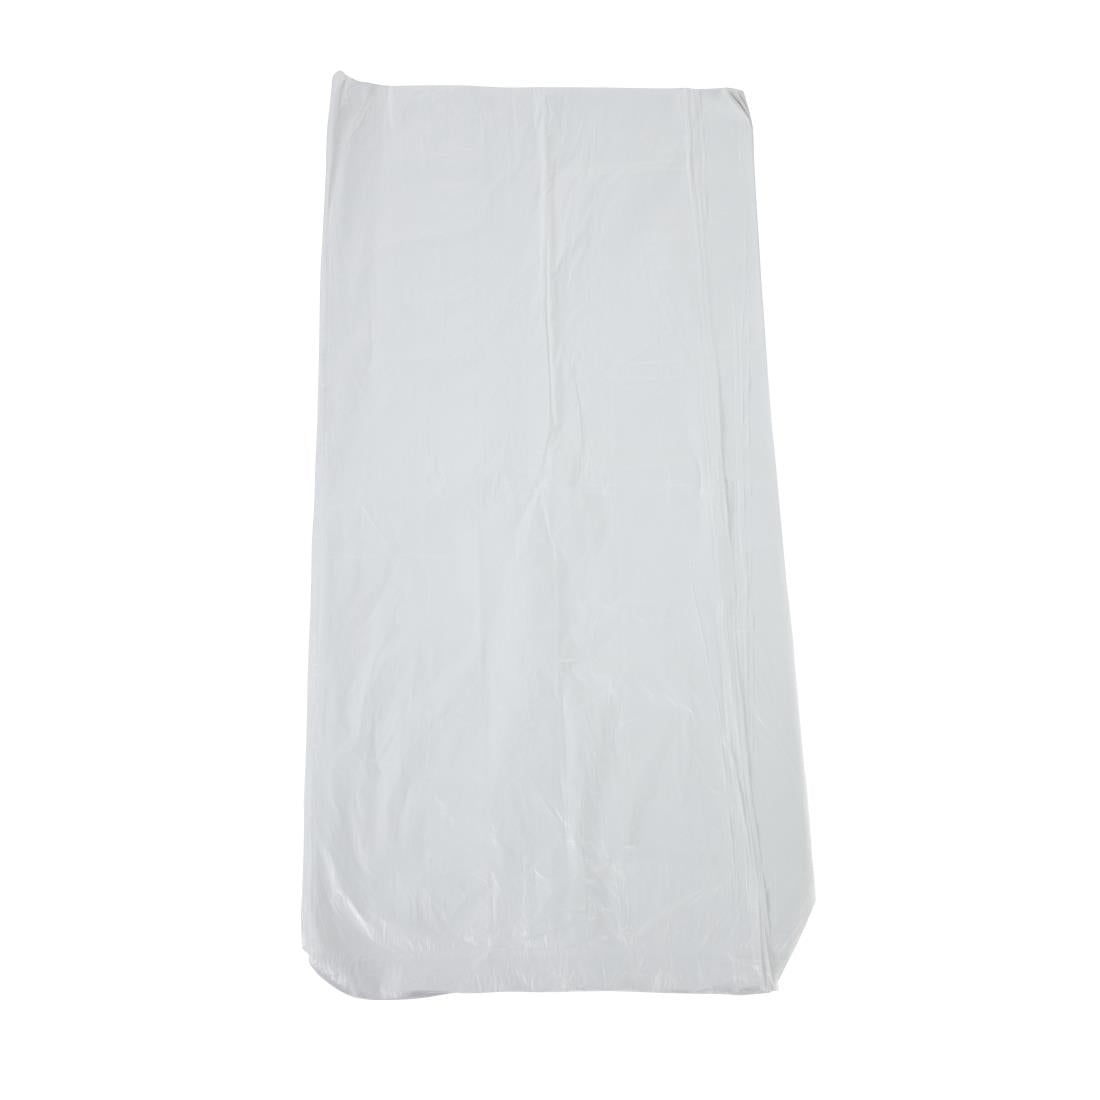 Jantex Small White Swing Bin Liners 50Ltr (Pack of 1000) JD Catering Equipment Solutions Ltd